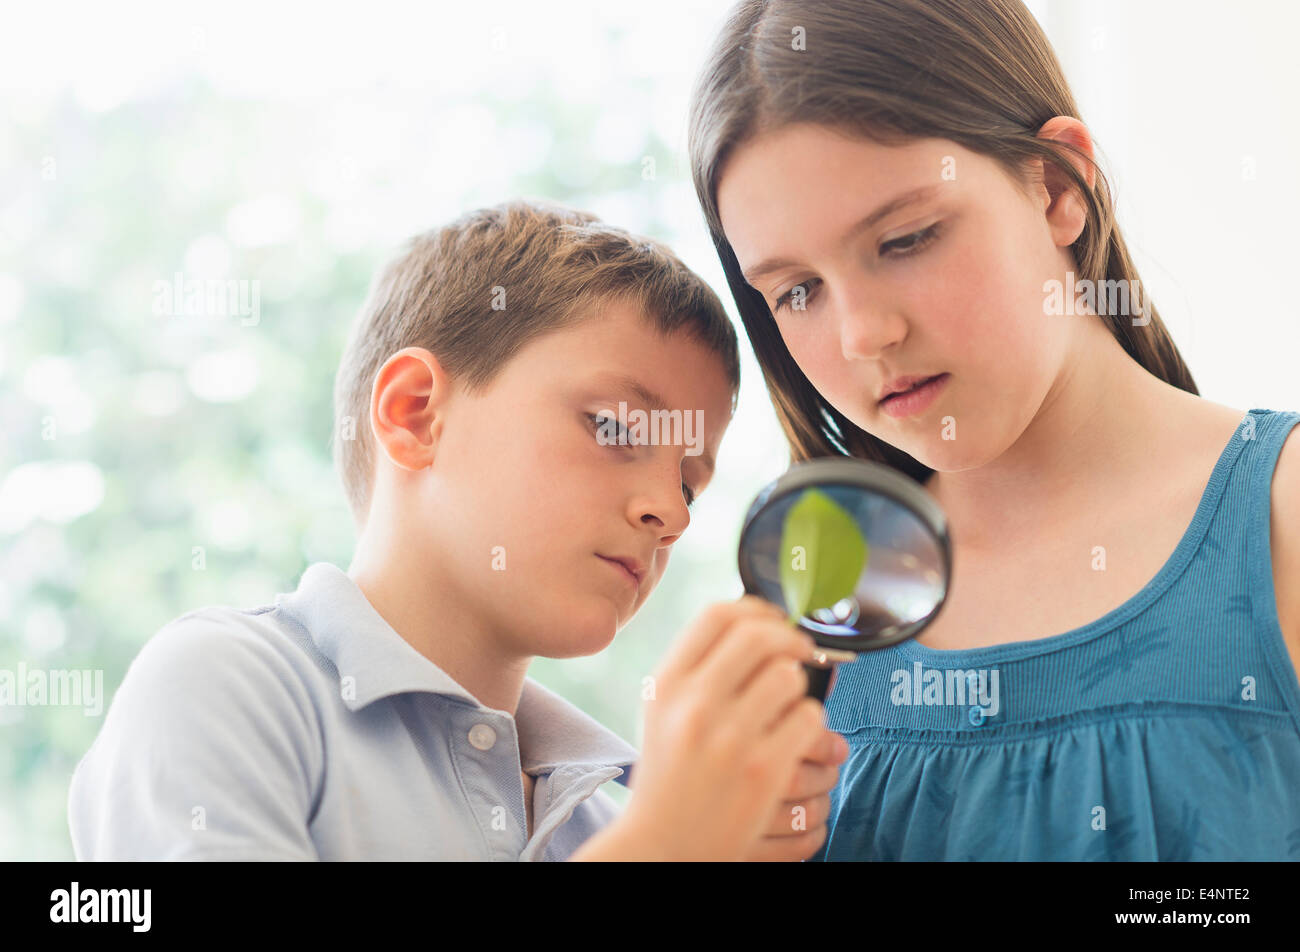 Boy and girl (8-9, 10-11) looking through magnifying glass Stock Photo